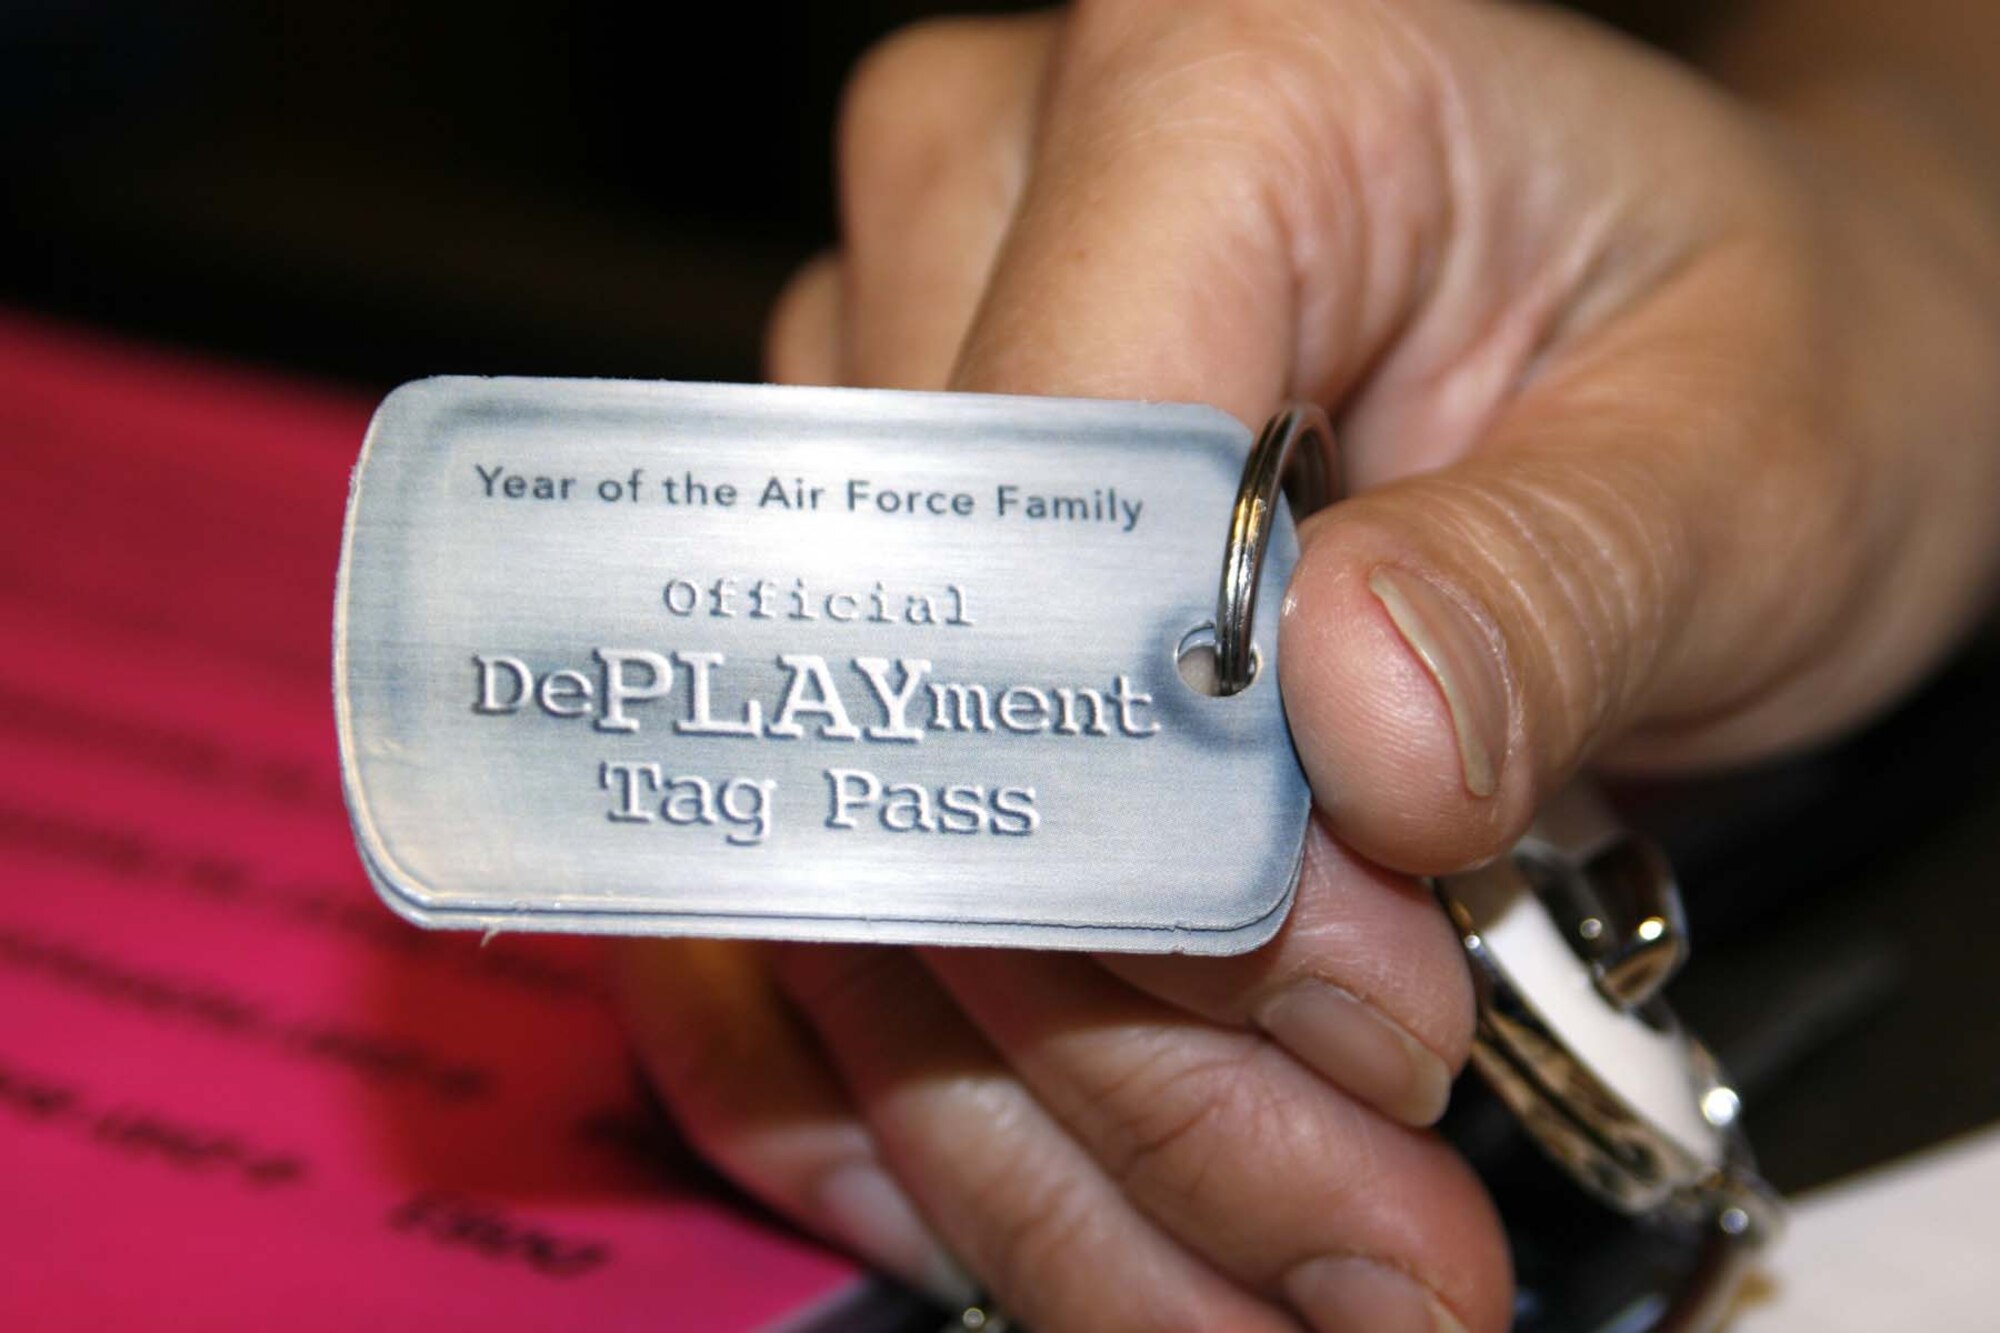 The DePLAYment program, part of the Year of the Air Force Family initiative, highlights programs and services that support Airmen and their families. Currently, only 20 percent of eligible military members have signed up for the Tinker program. (Air Force photosby Becky Pillifant)